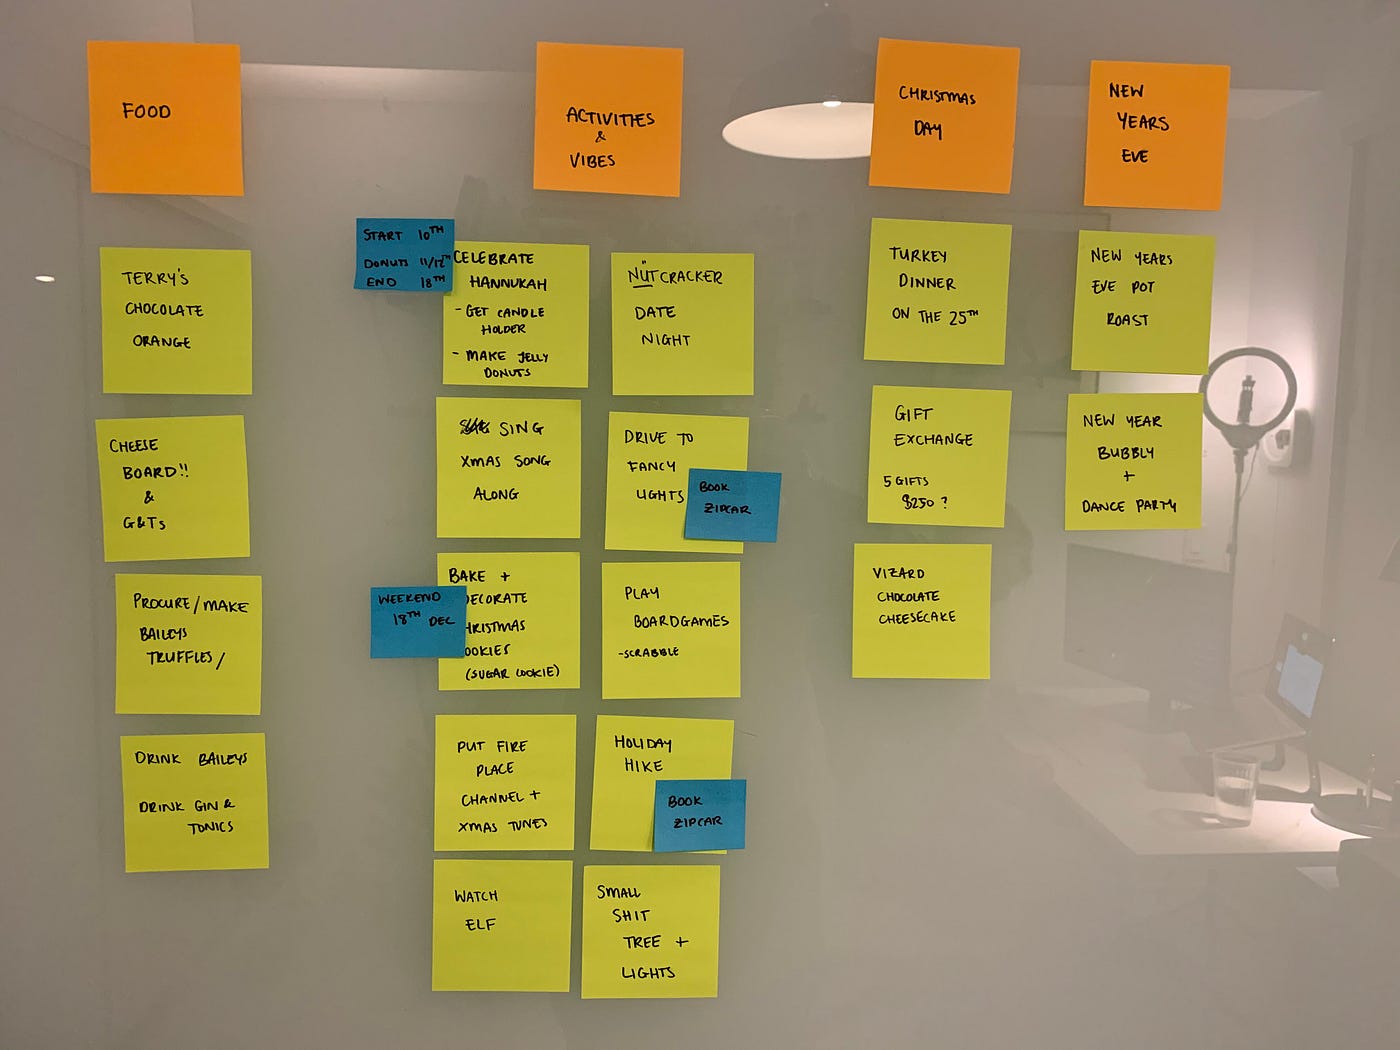 The Lay Persons' Guide to Using Post-It Notes to Get Your Stuff in Order, by Linn Vizard